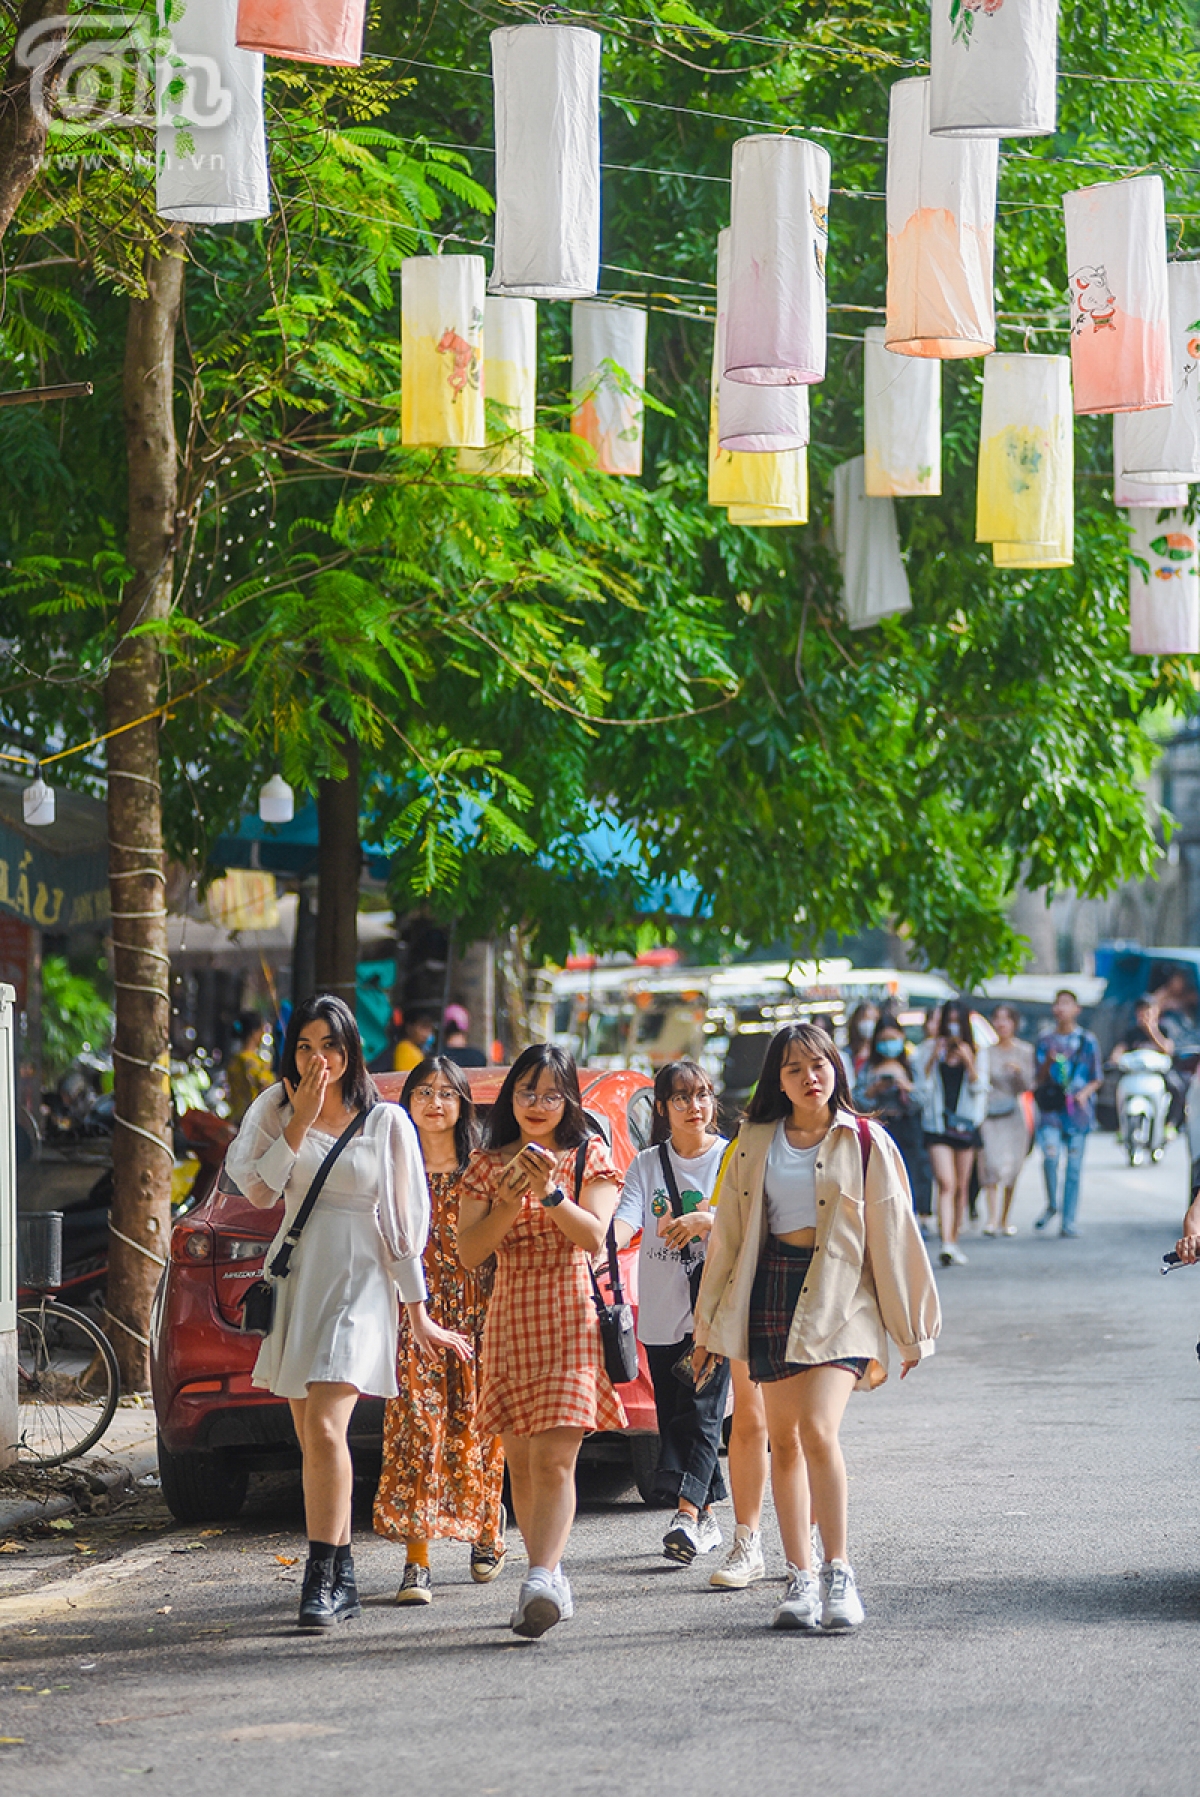 The street proves to be popular among visitors, particularly young people, during celebrations for the Full-moon Festival.